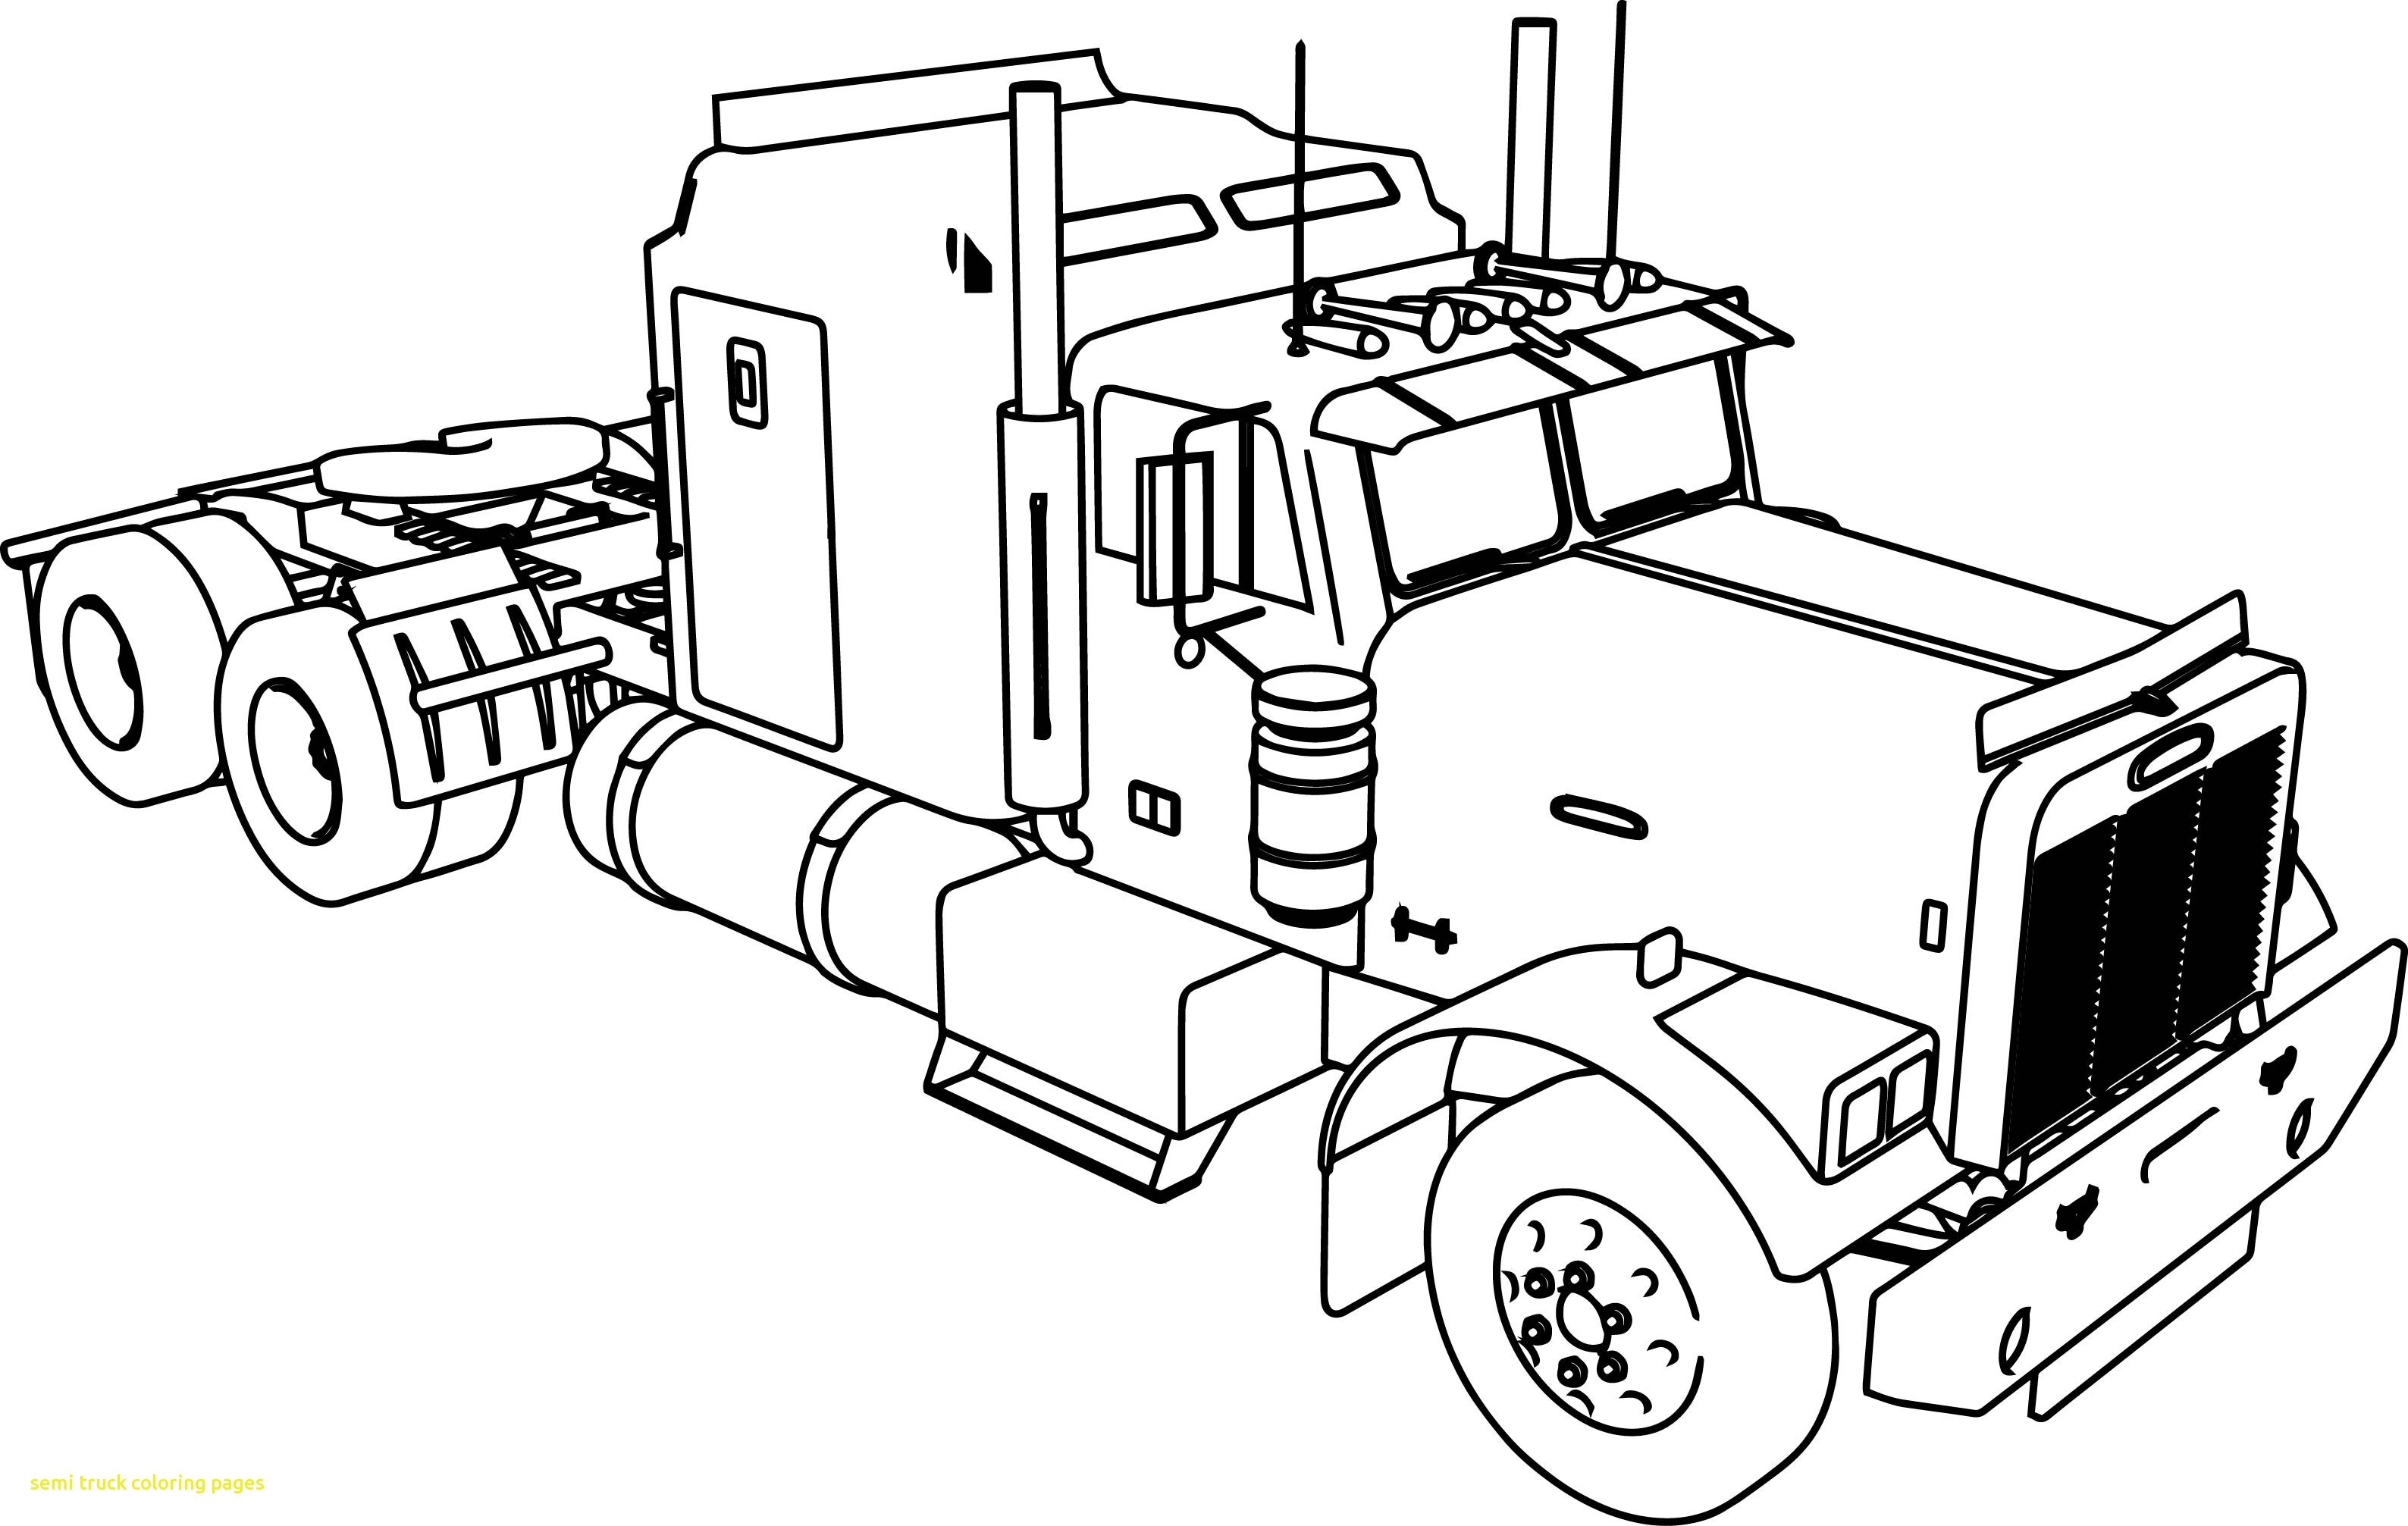 Tow Truck Coloring Pages at GetColorings.com | Free printable colorings